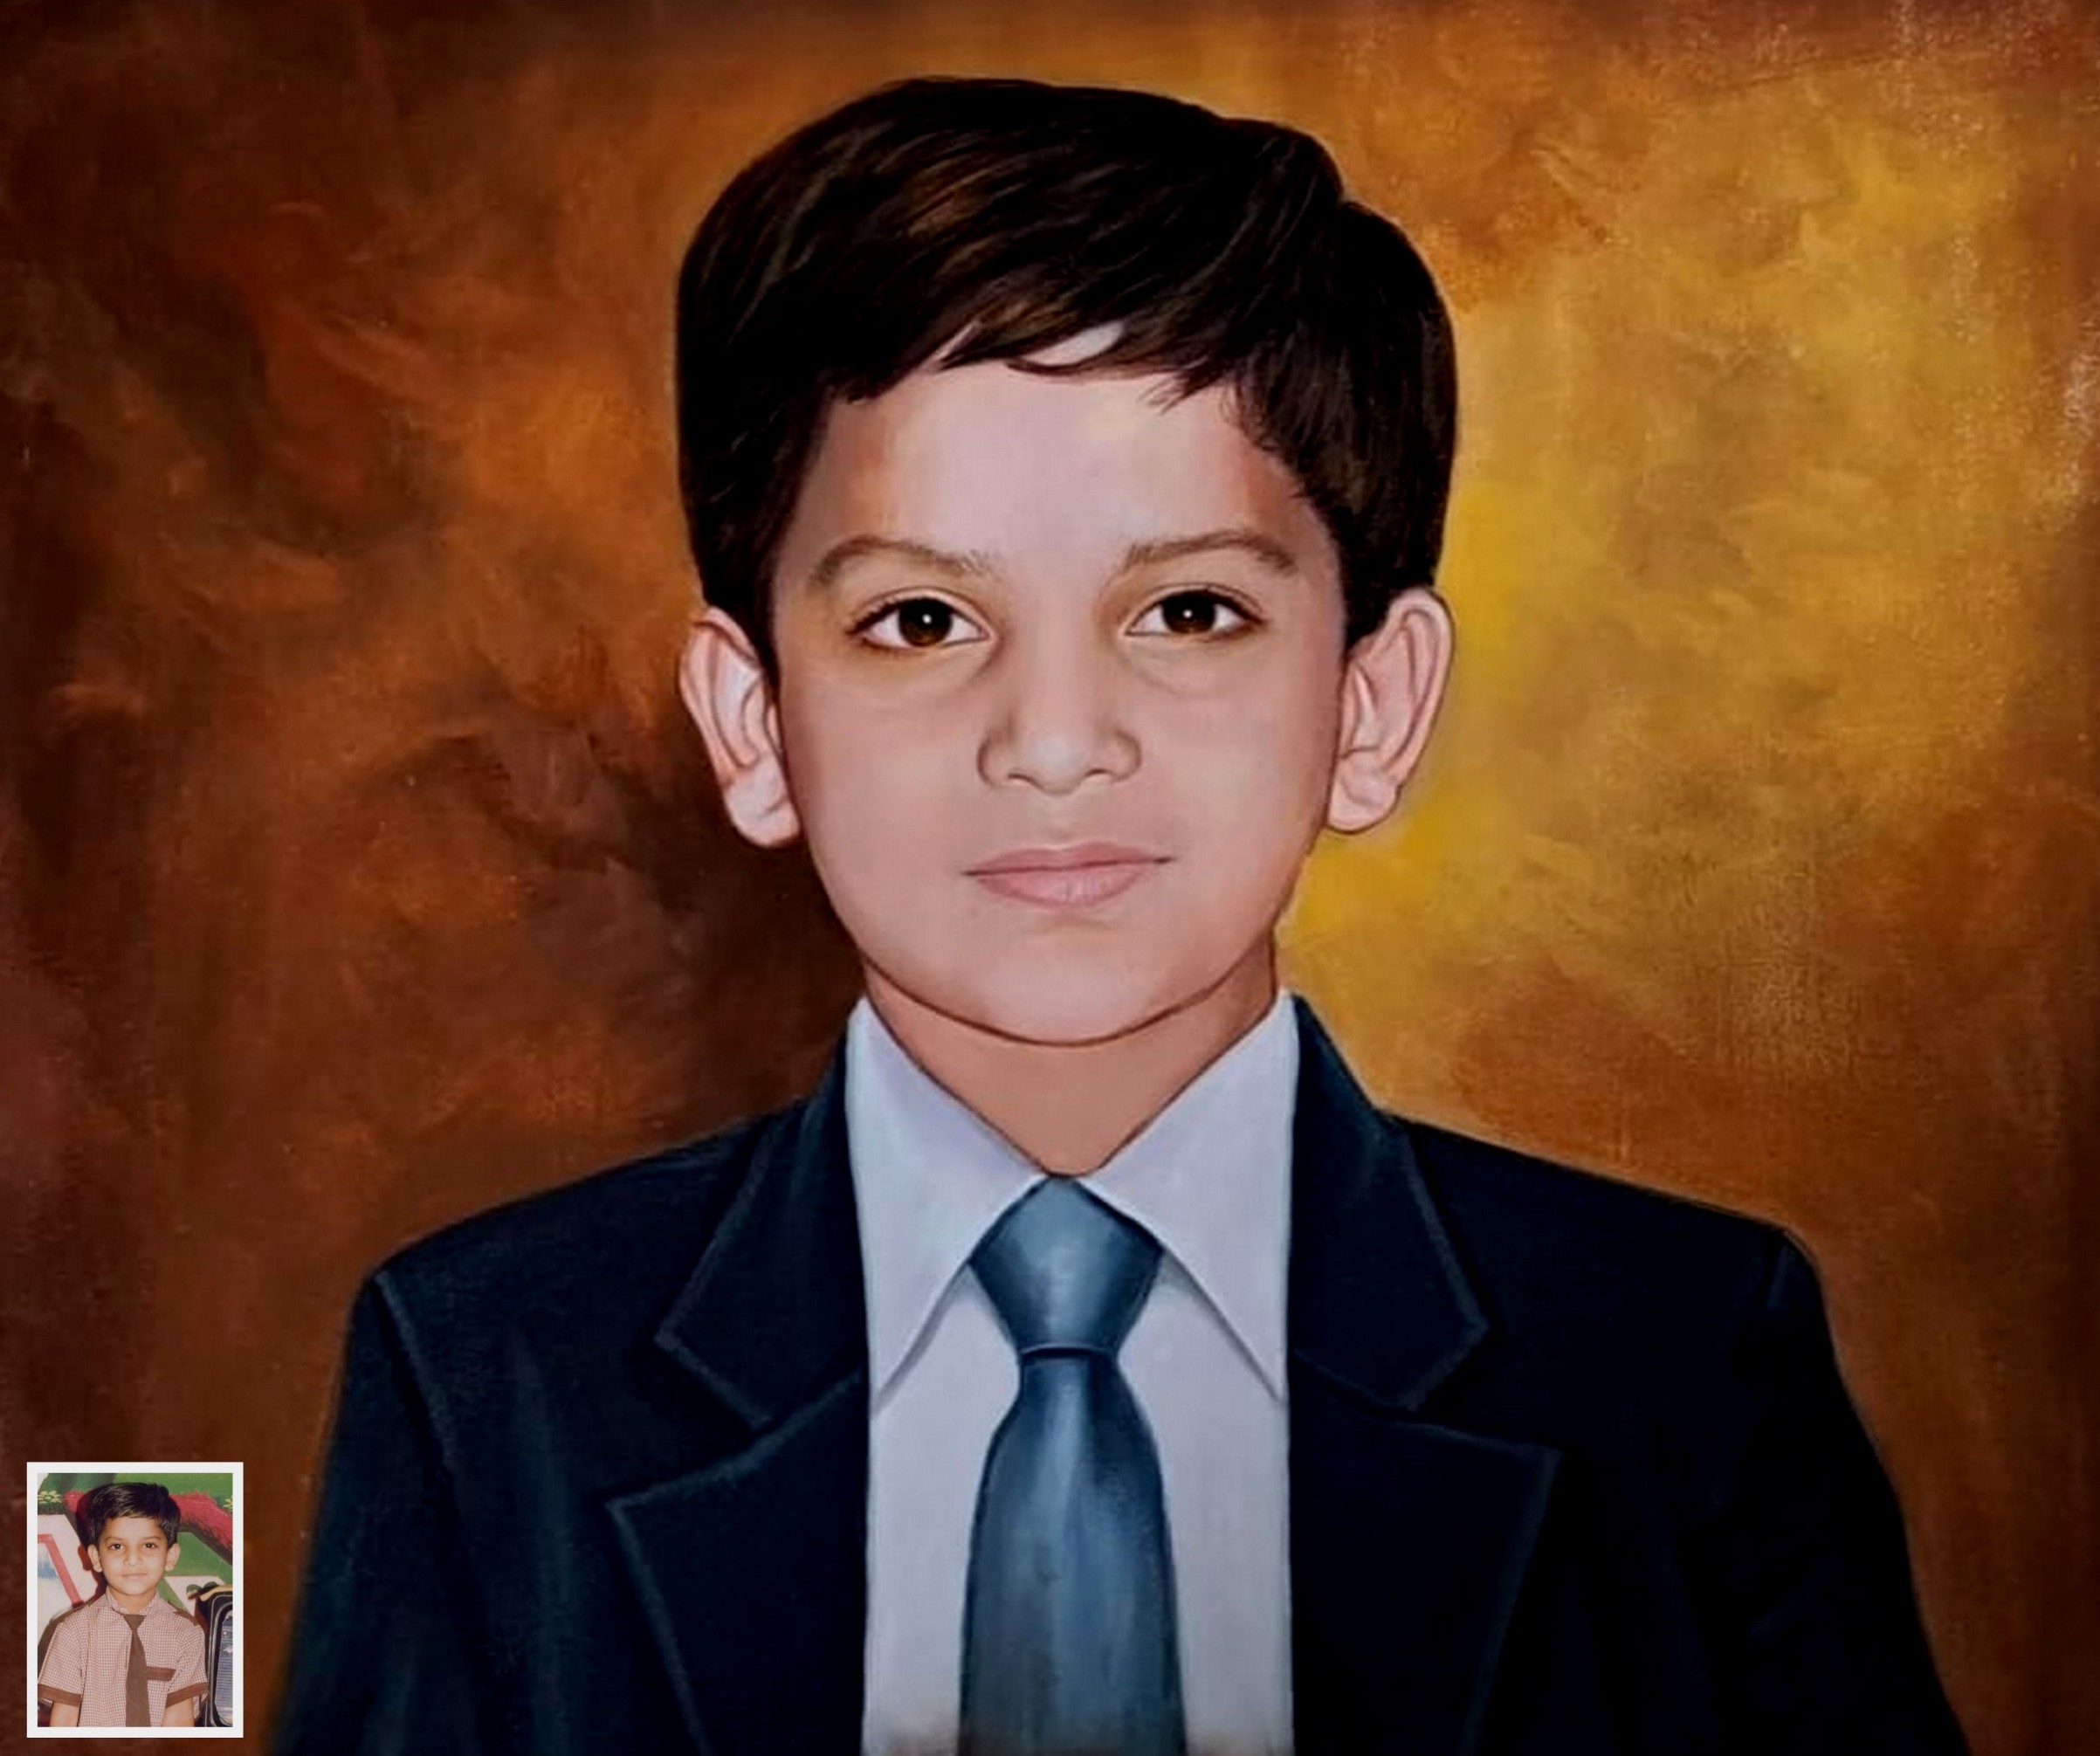 photo to painting of young boy, child portrait painting, photo to handmade portrait, photo painting